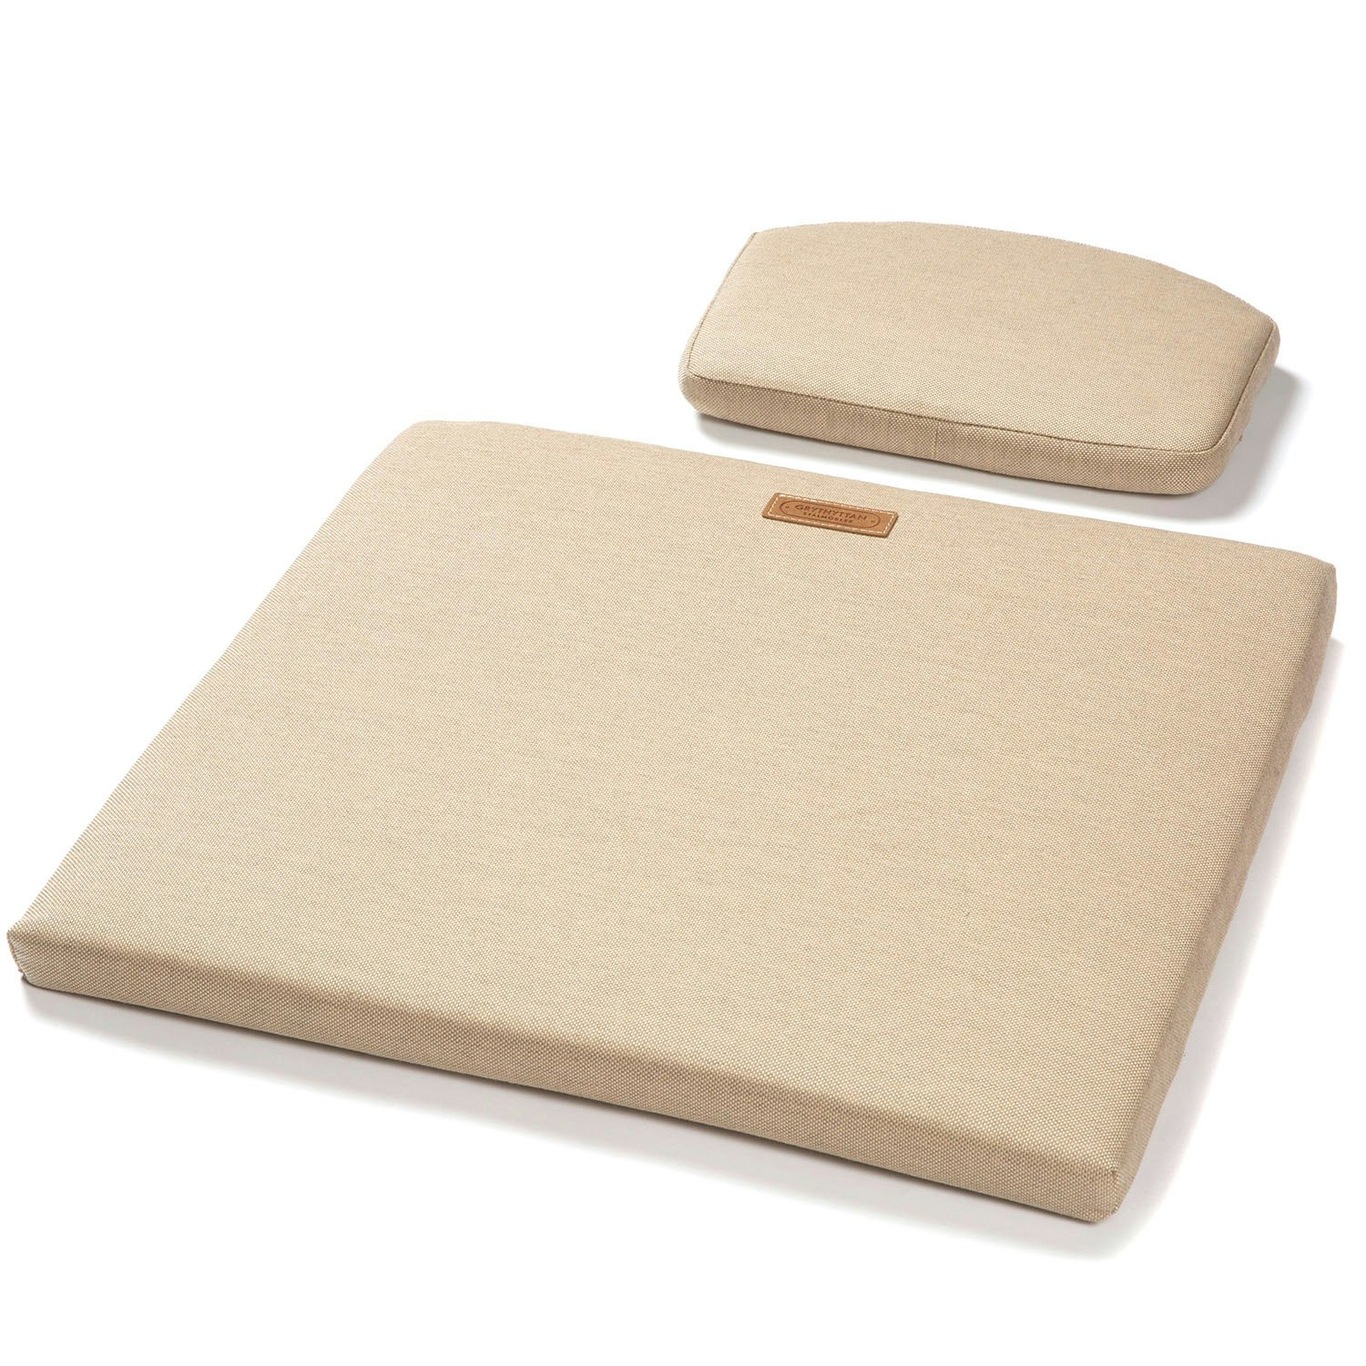 A3 Seat Cushion For Lounge Chair, Beige